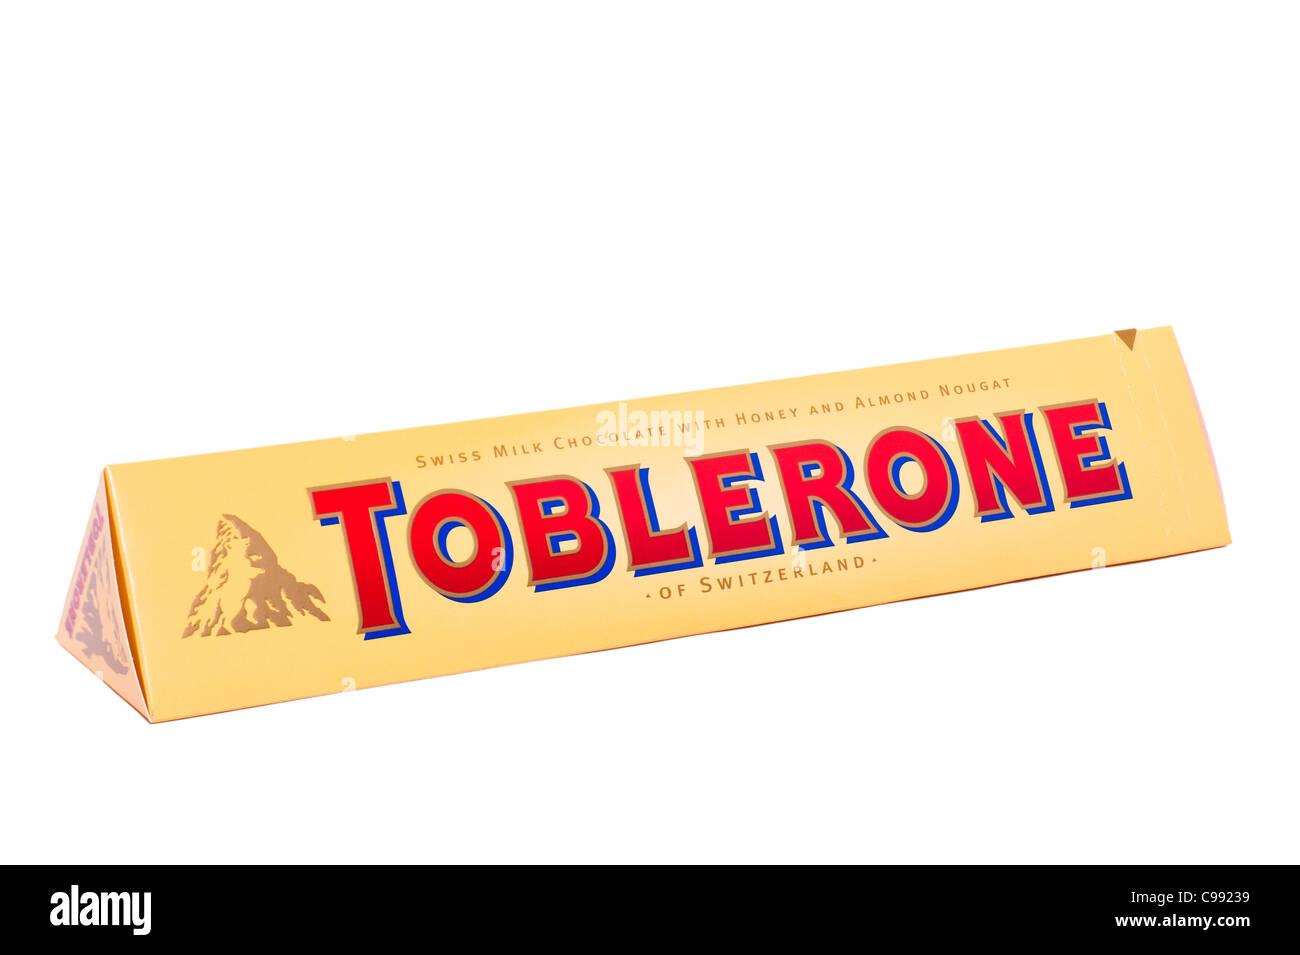 A Toblerone Swiss milk chocolate bar with honey and almond nougat on a white background Stock Photo